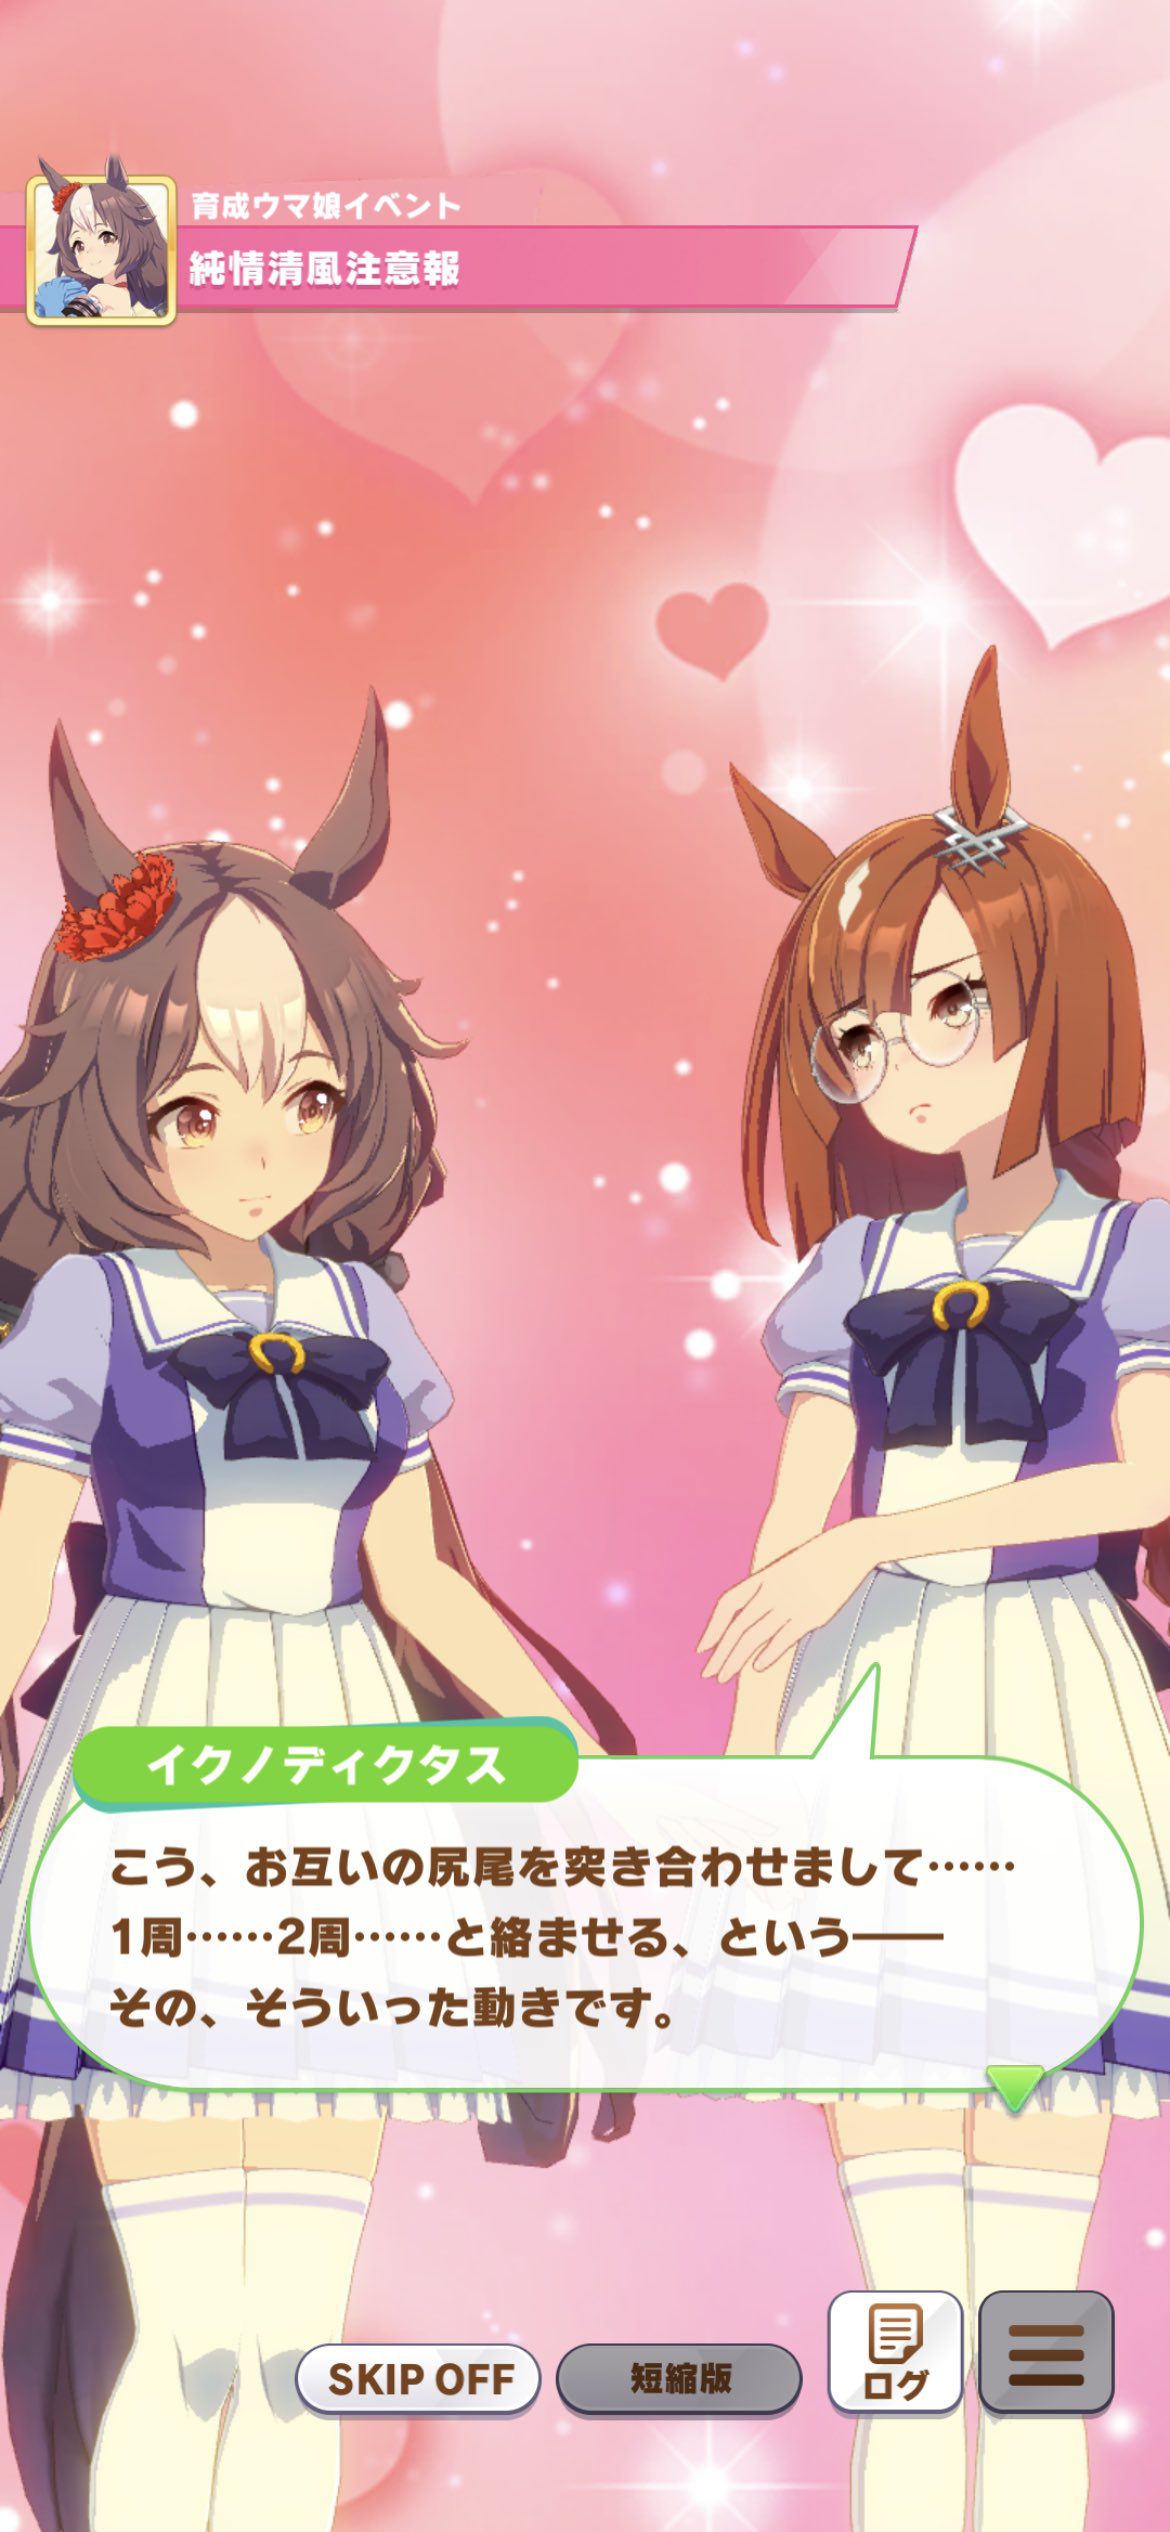 【Image】Uma Musume will implement a new character with the most erotic costume ever 14